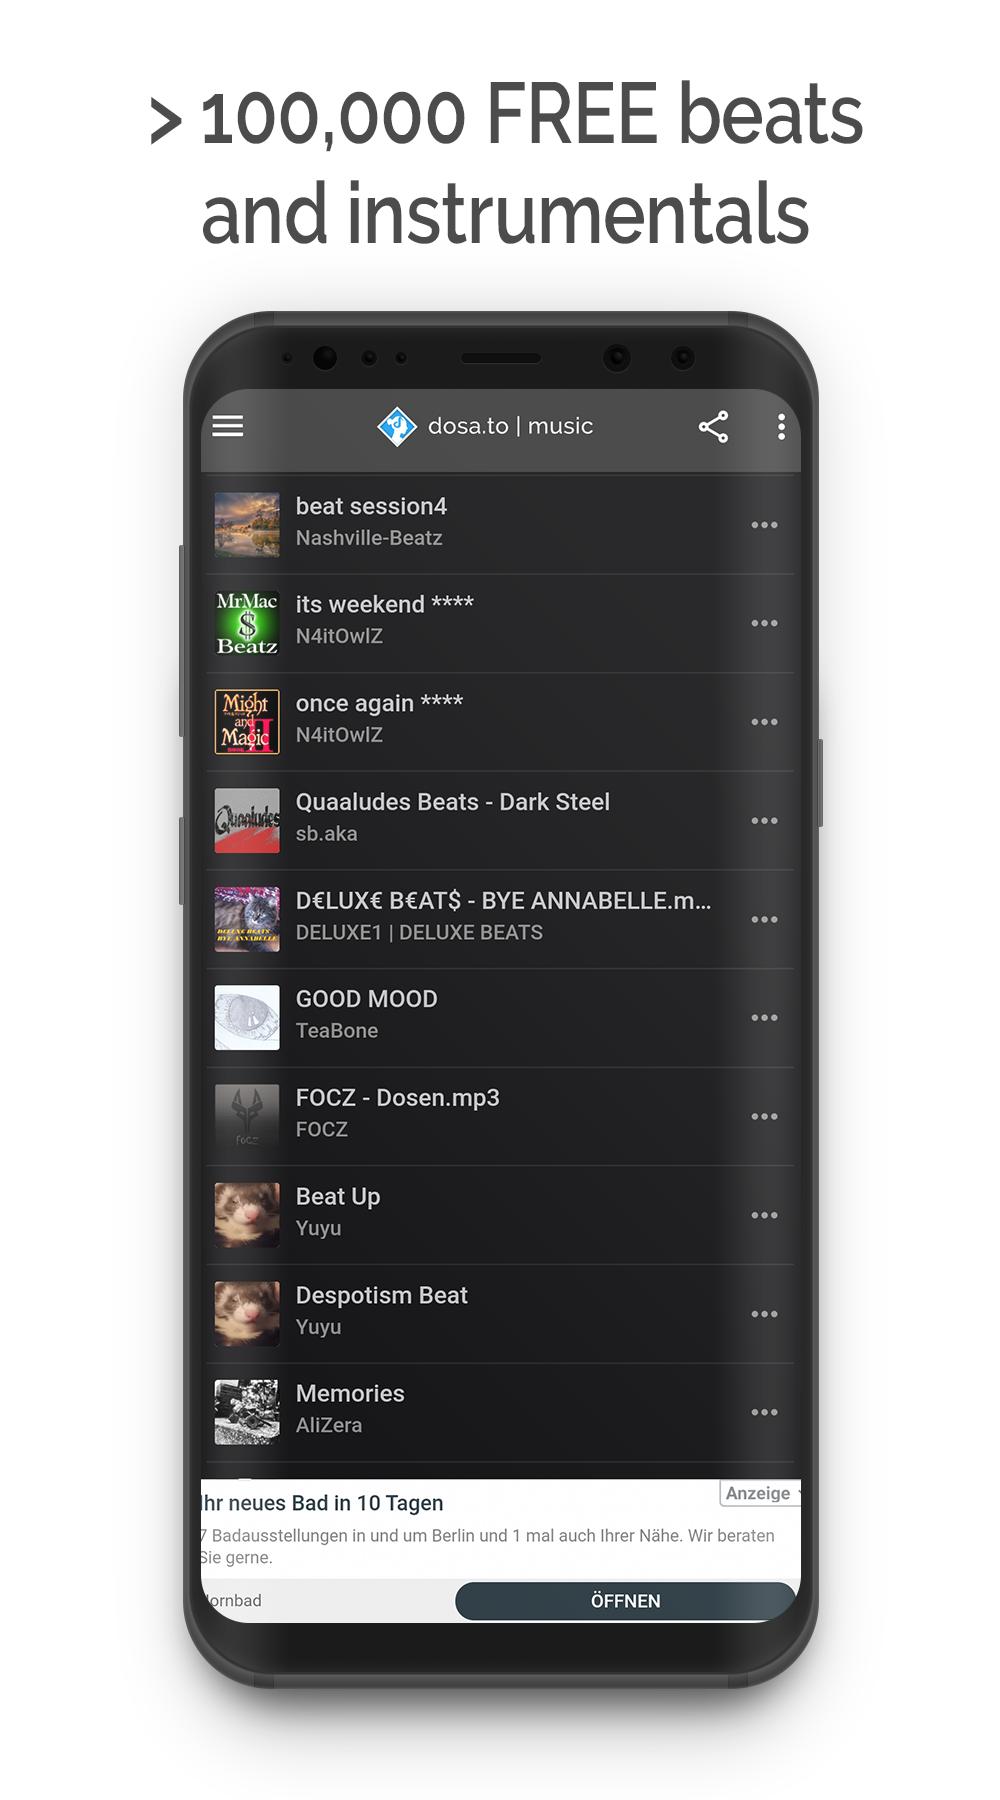 dosa.to music for Android - APK Download